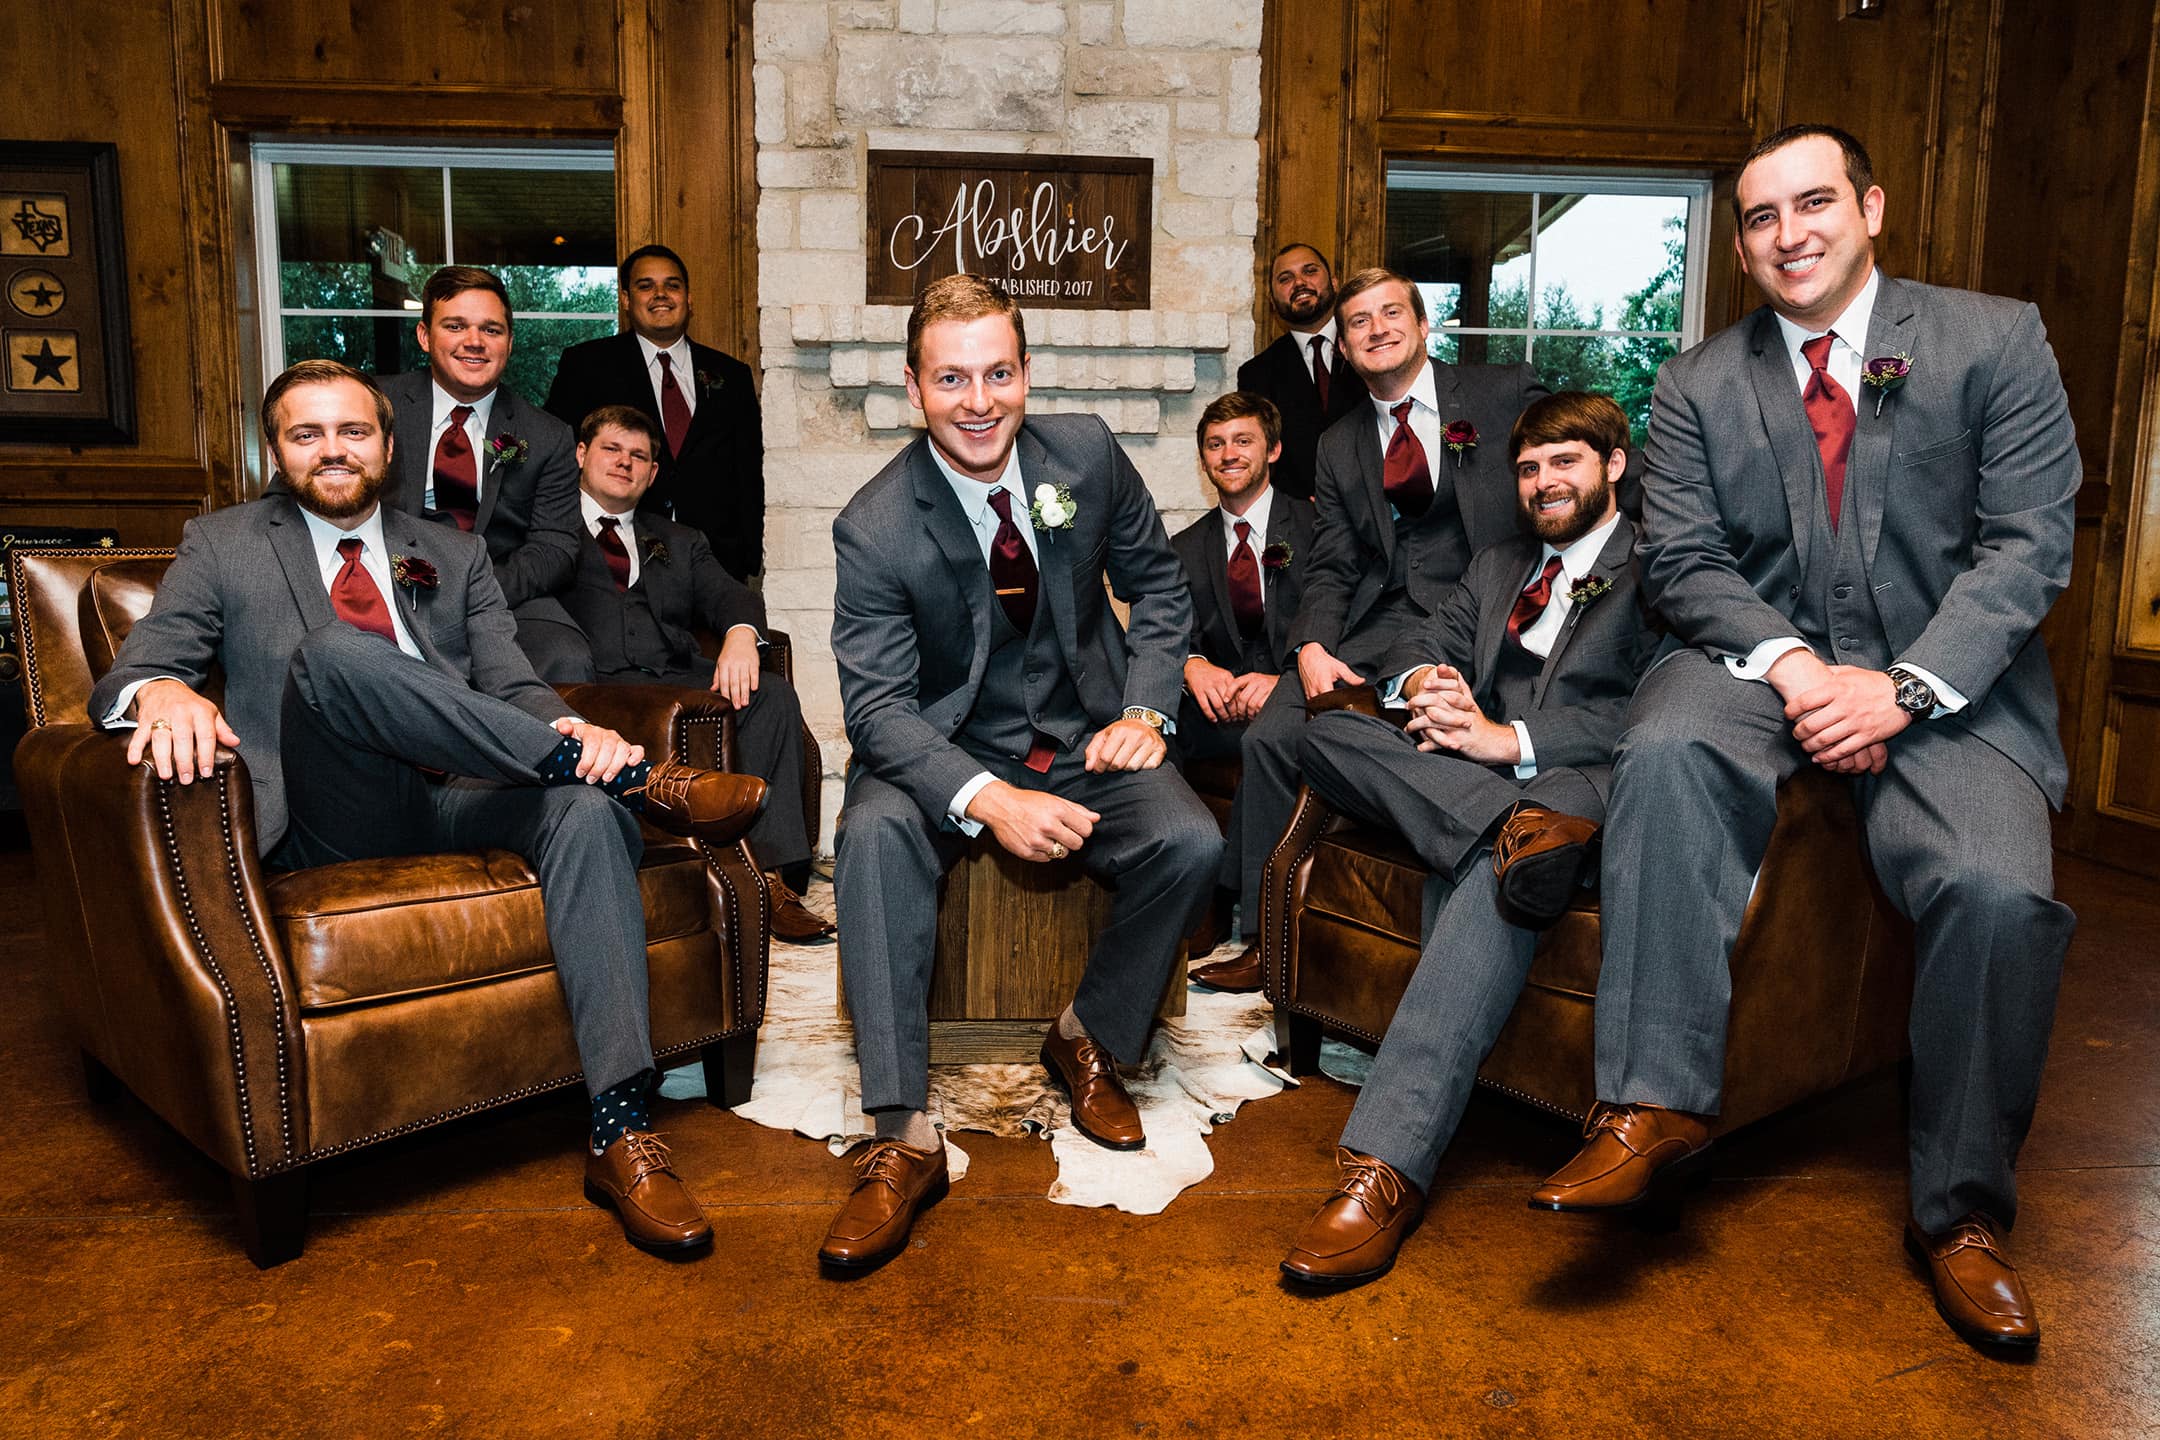 Groom and groomsmen pose for the camera